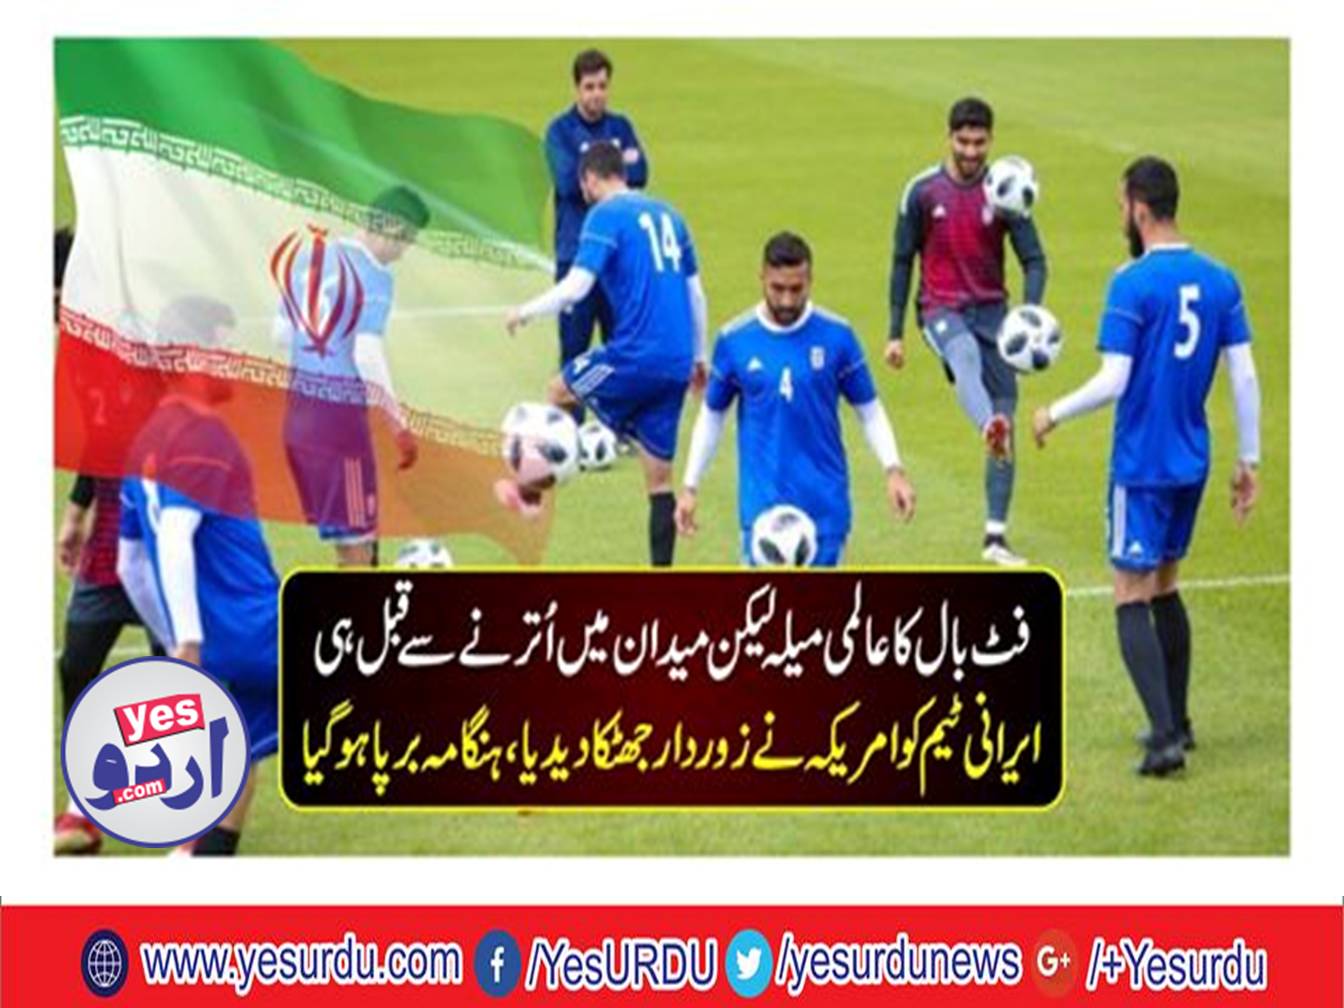 The leading American company refused to supply shoes to the participant Iranian team in the World Cup